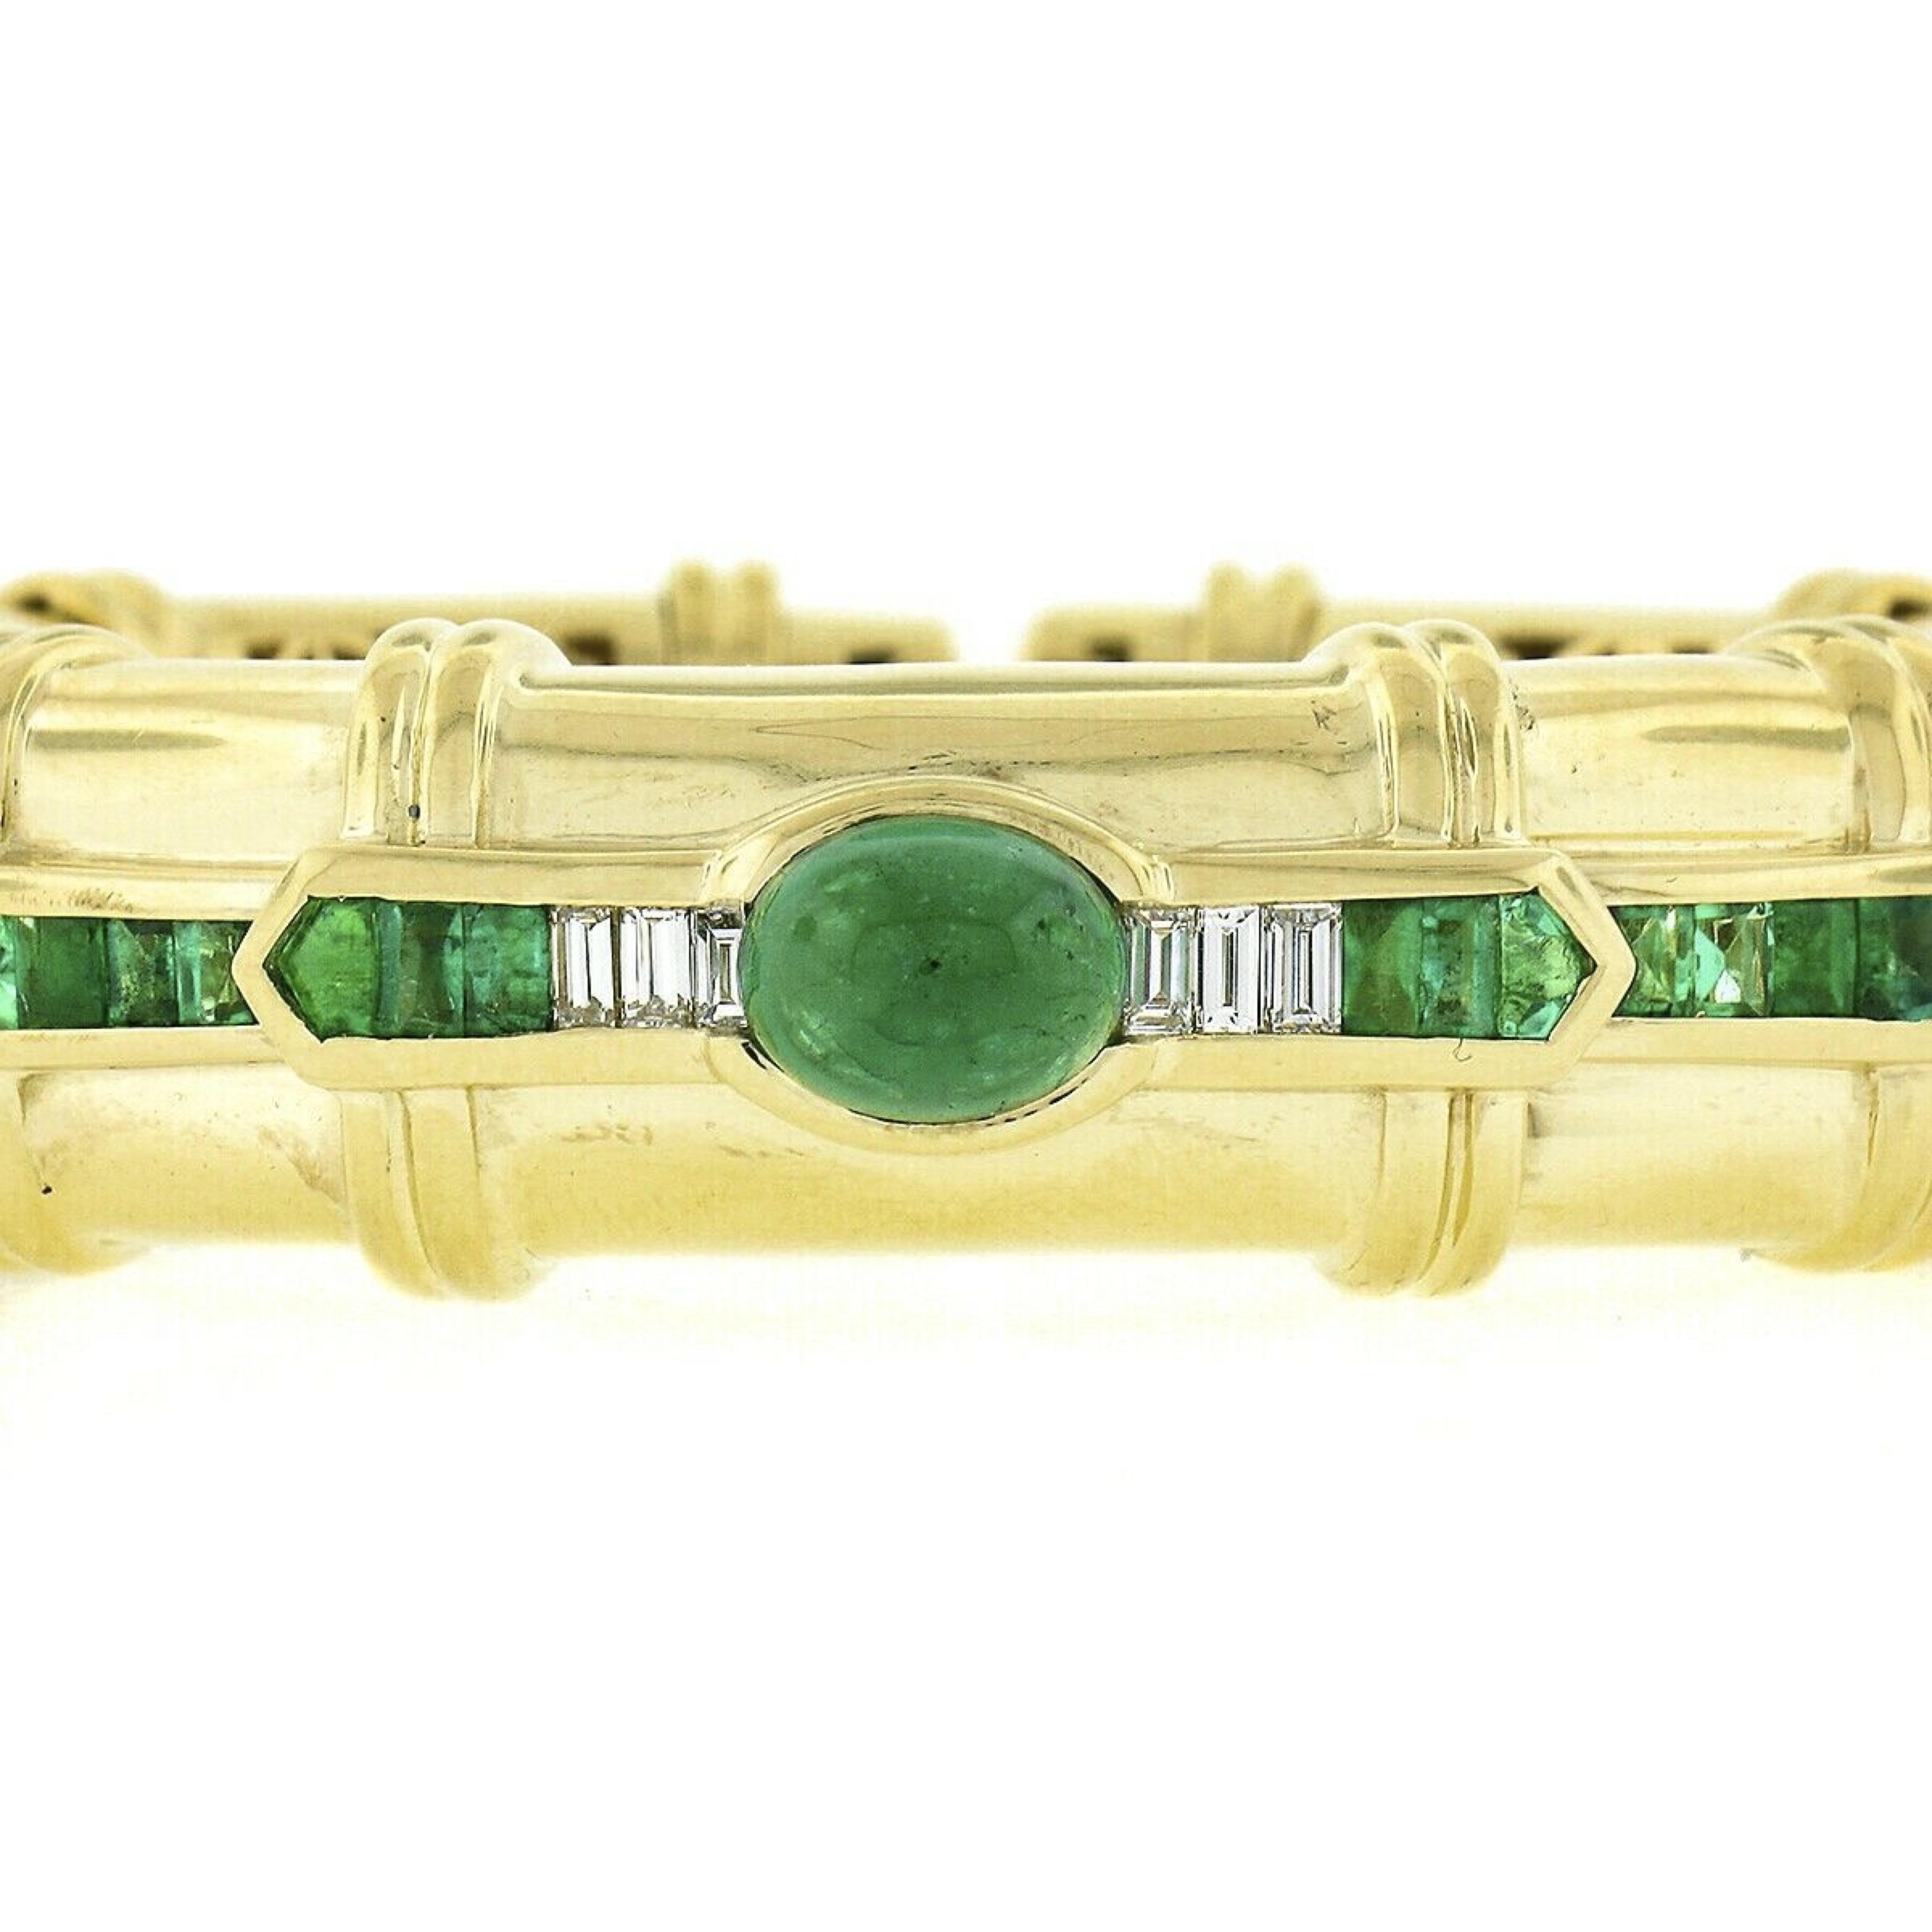 Here we have an absolutely magnificent and elegant emerald and diamond flexible cuff bracelet crafted in solid 18k yellow gold. This well made, bold bracelet is neatly bezel set with a GIA certified oval cabochon set emerald at its center. This